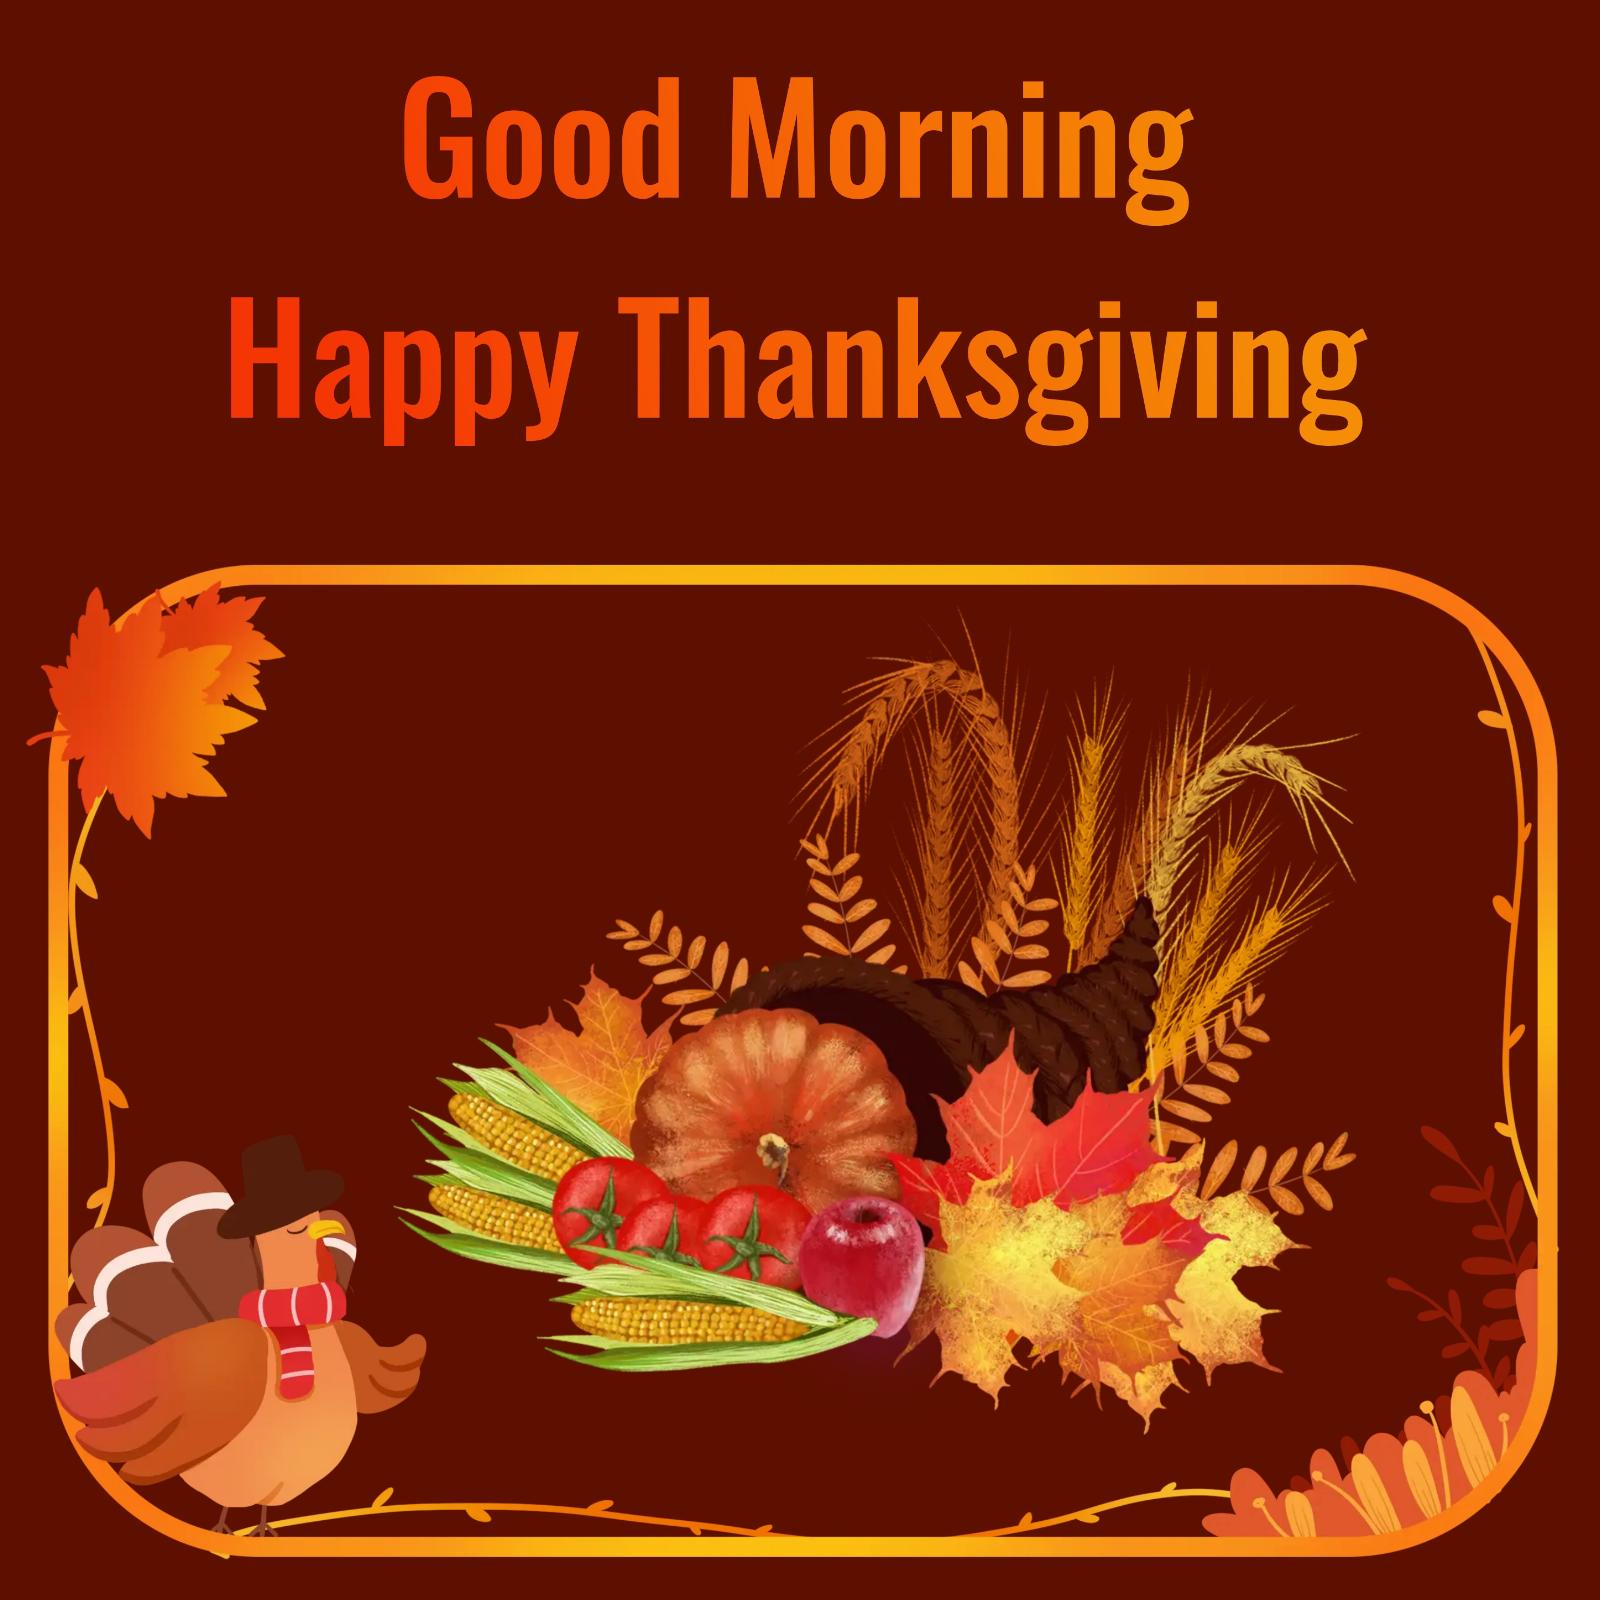 Good Morning Happy Thanksgiving Images